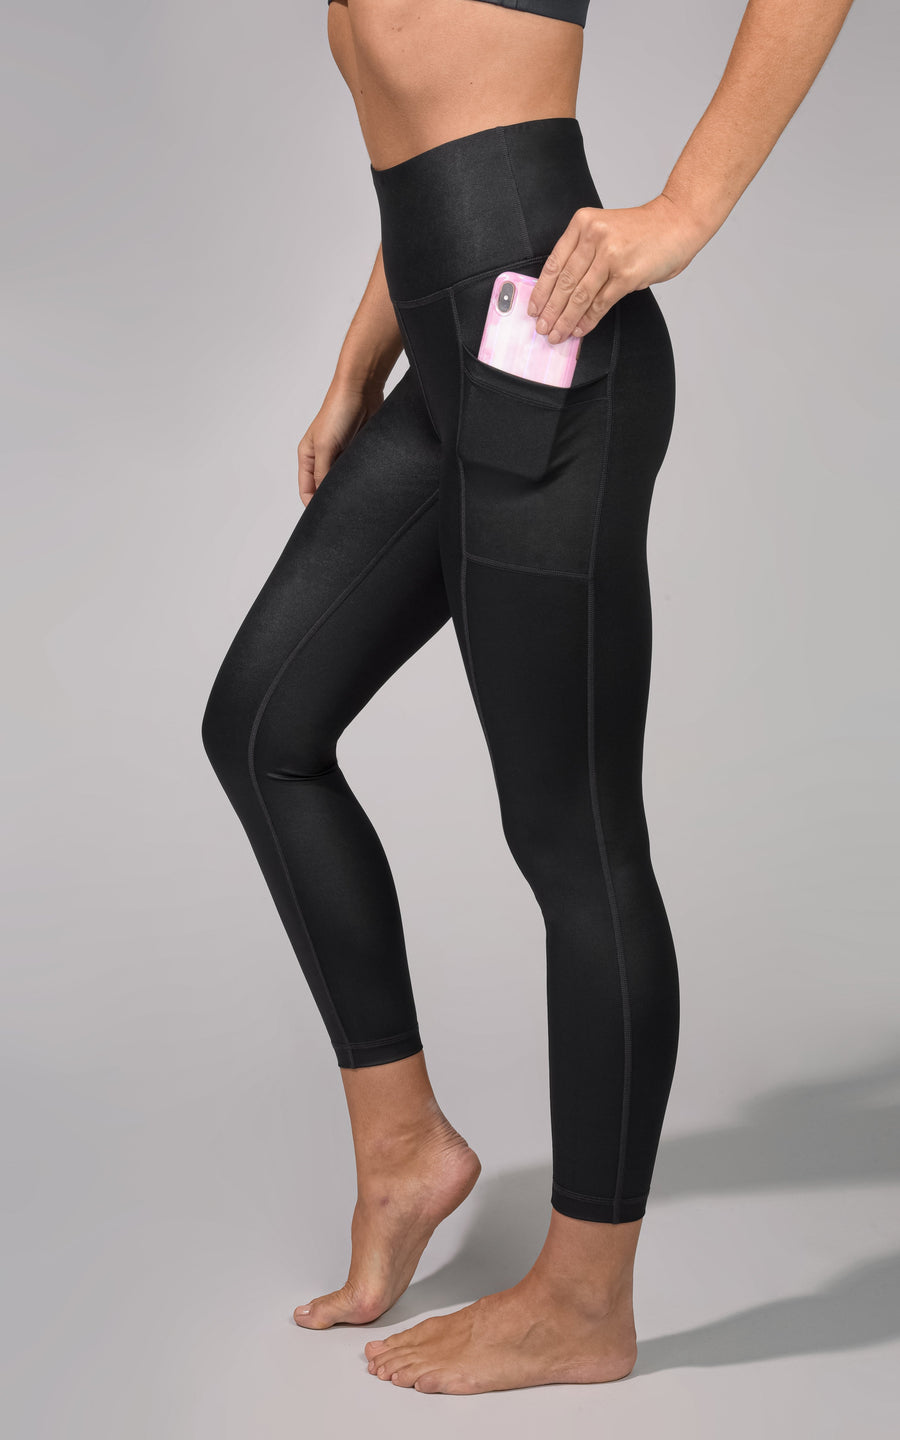 90 Degree by Reflex - High Waist Flared Yoga Pant with Front Slits Black  Sz.XL